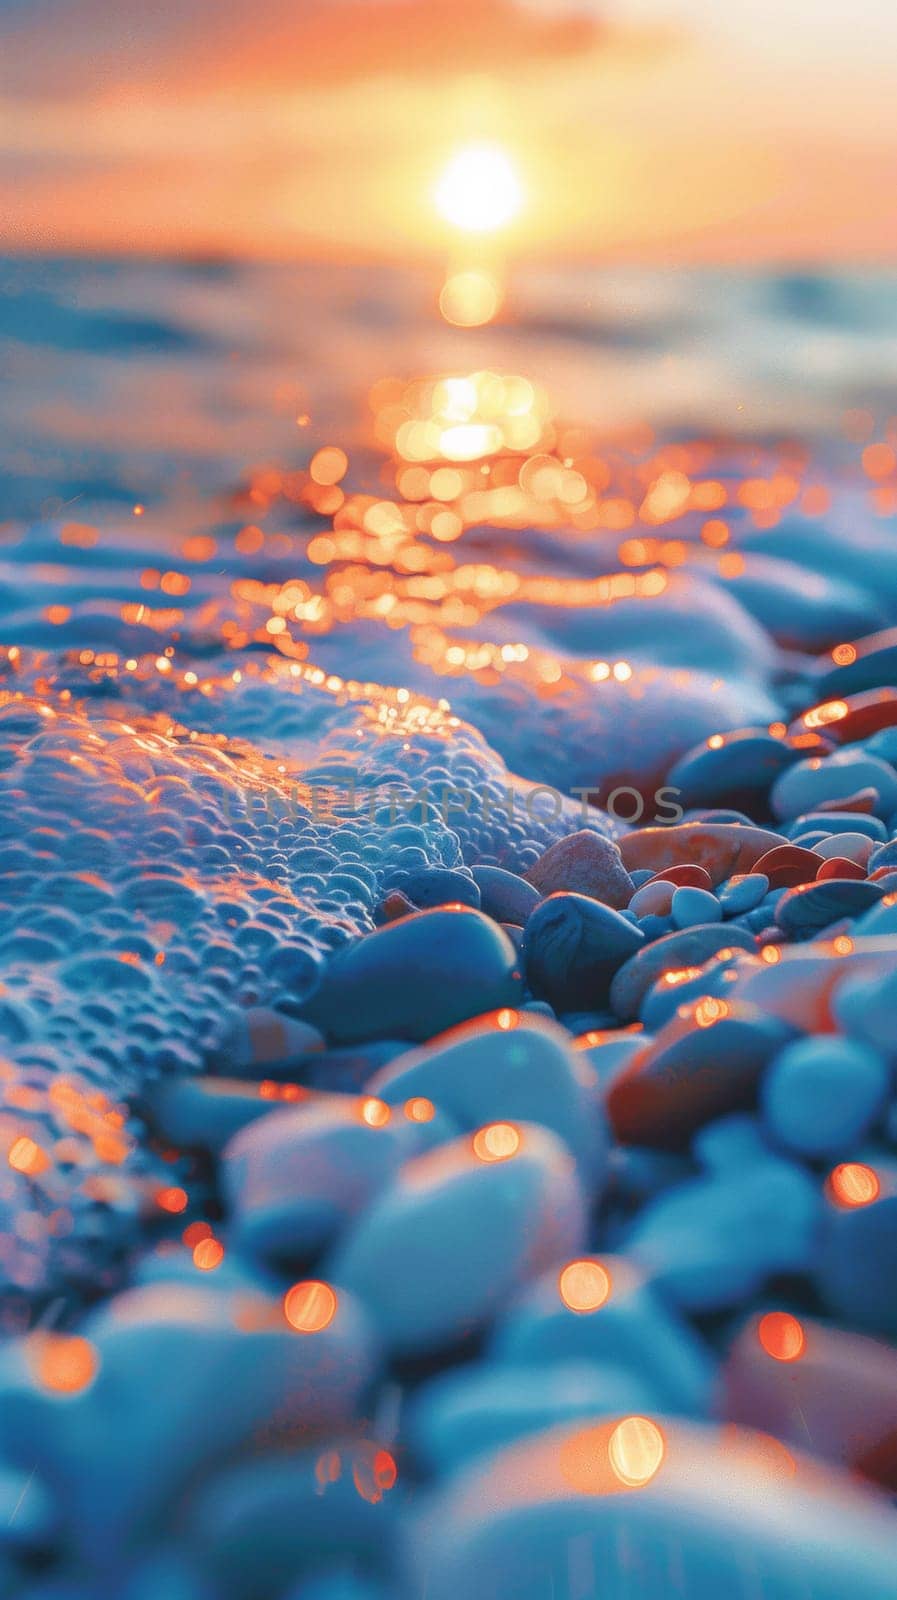 A close up of a sunset over the ocean with pebbles